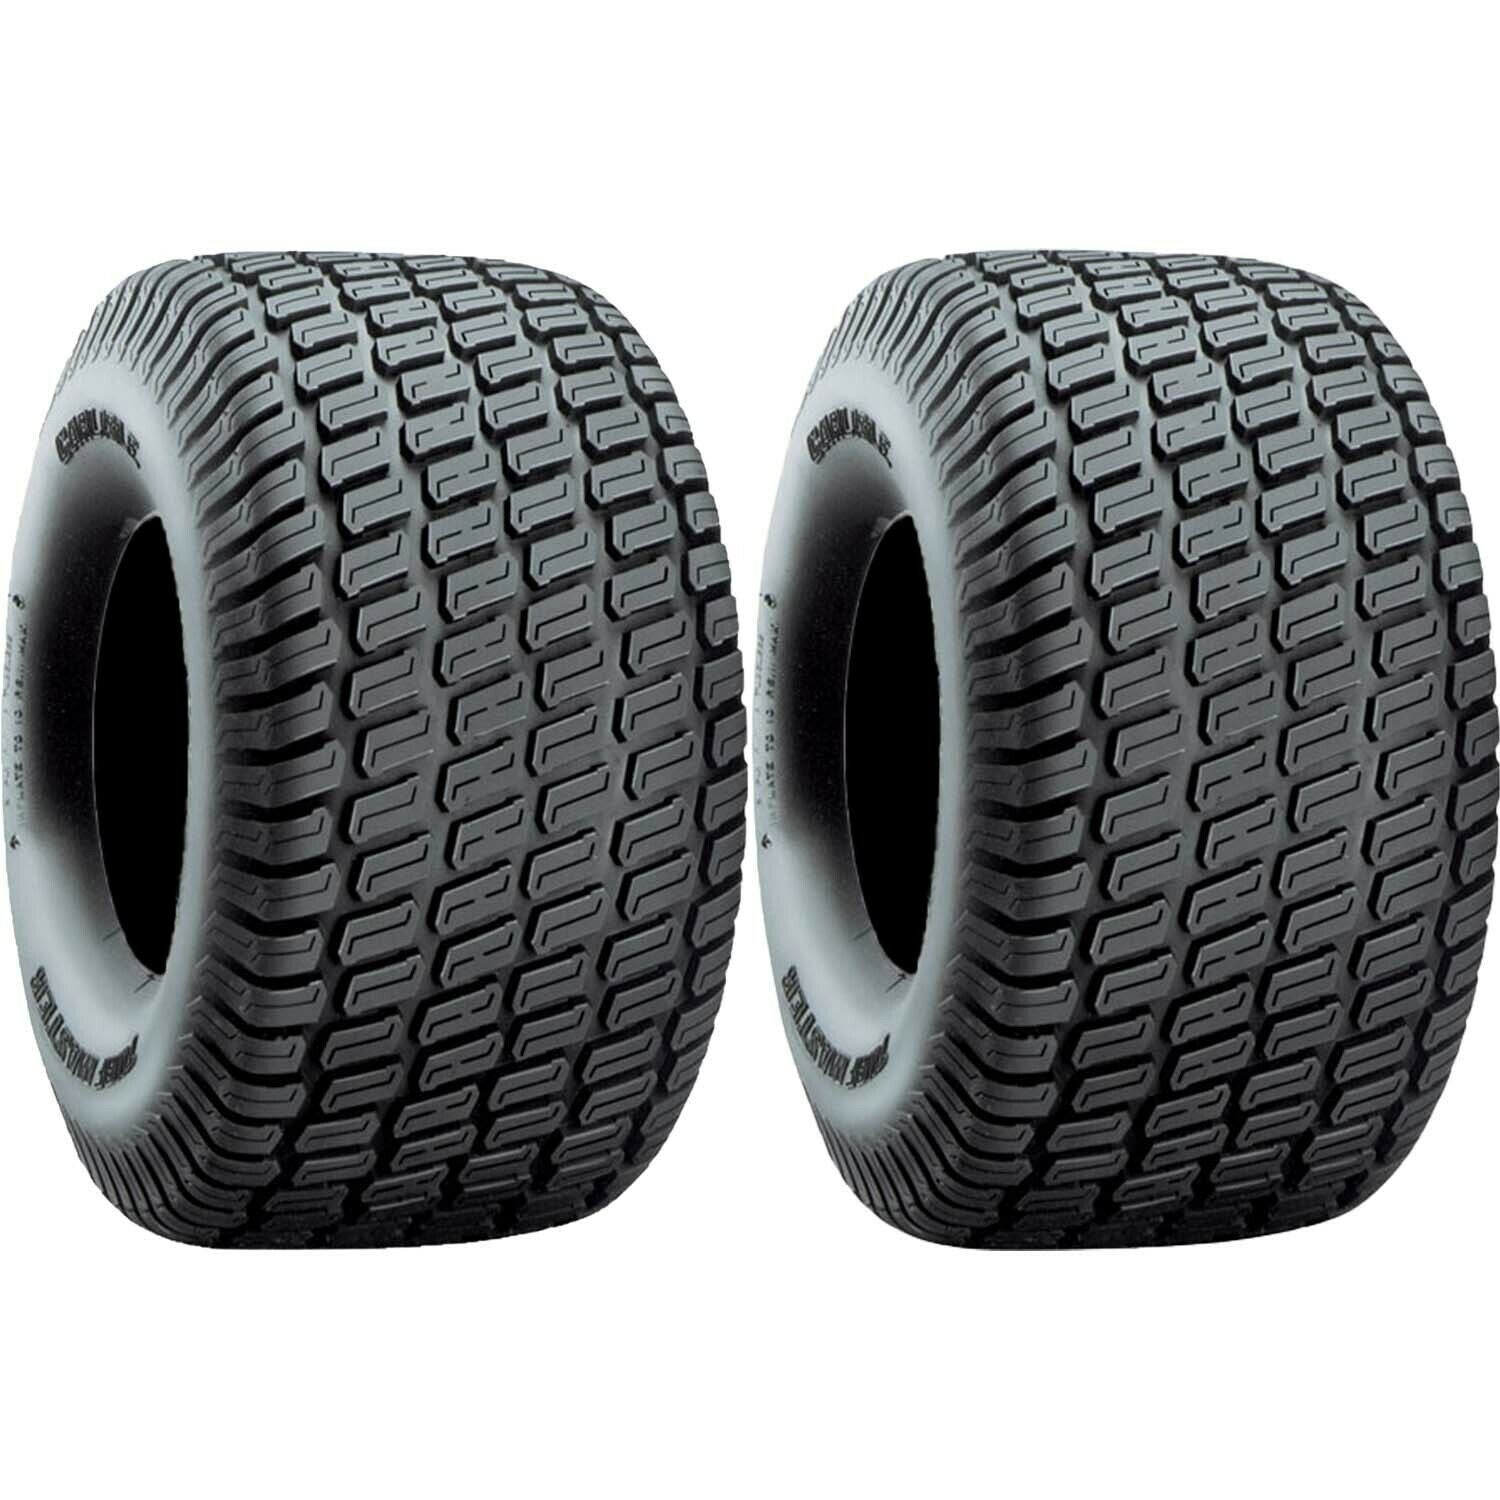 Carlisle Turf Master Lawn and Garden Tire 4Ply 20x10.00-8 - Pack of 2